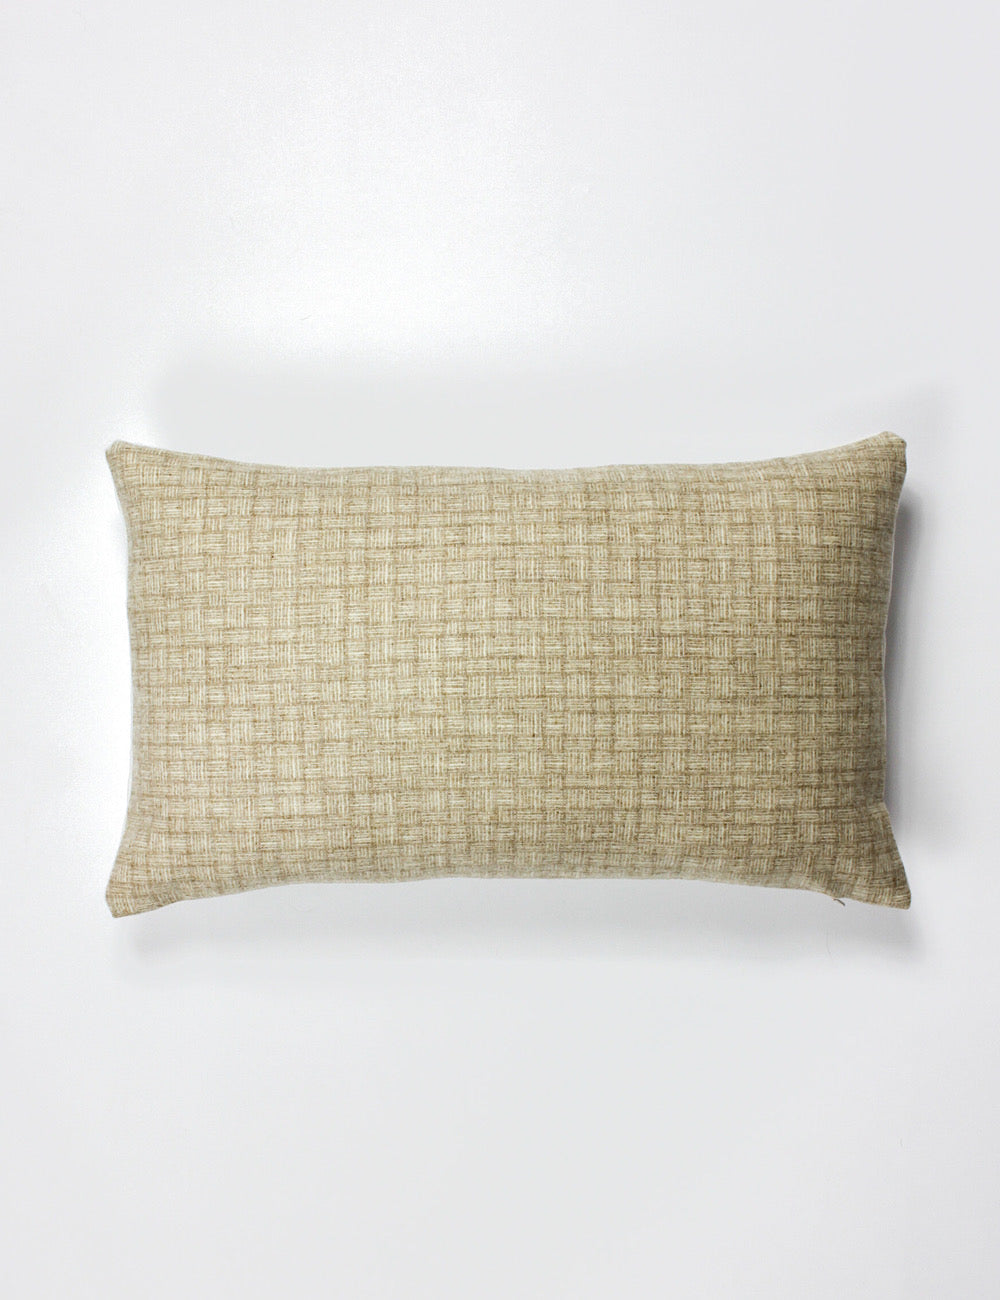 Lumbar scatter cushion cover with a neutral colour and subtle small scale woven pattern going across. 